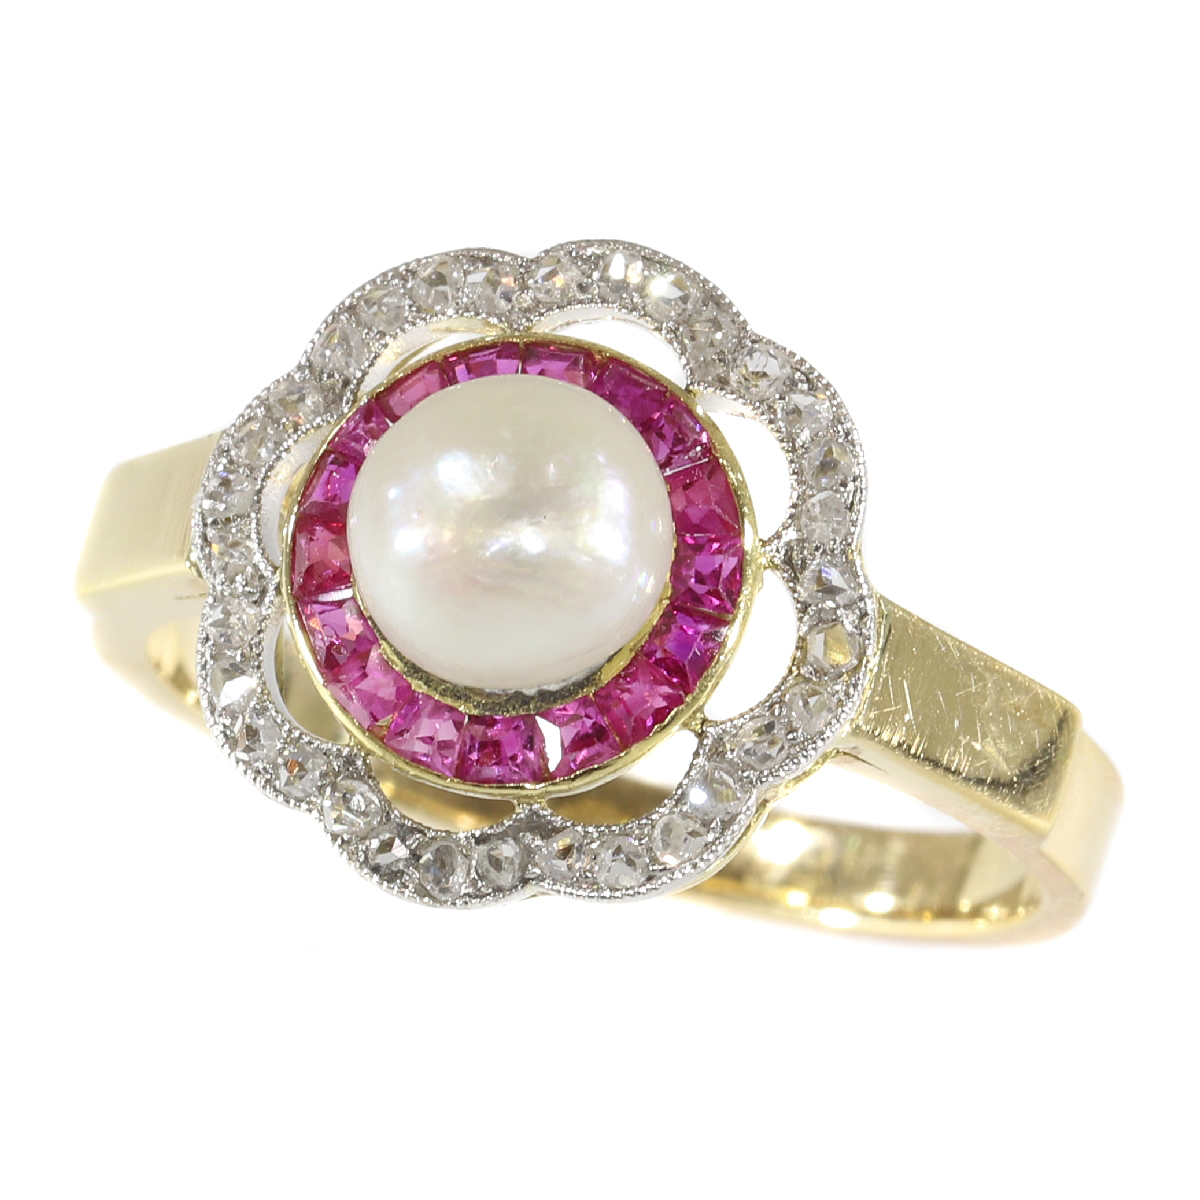 Most charming Art Deco engagement ring with rubies rose cut diamonds and a pearl